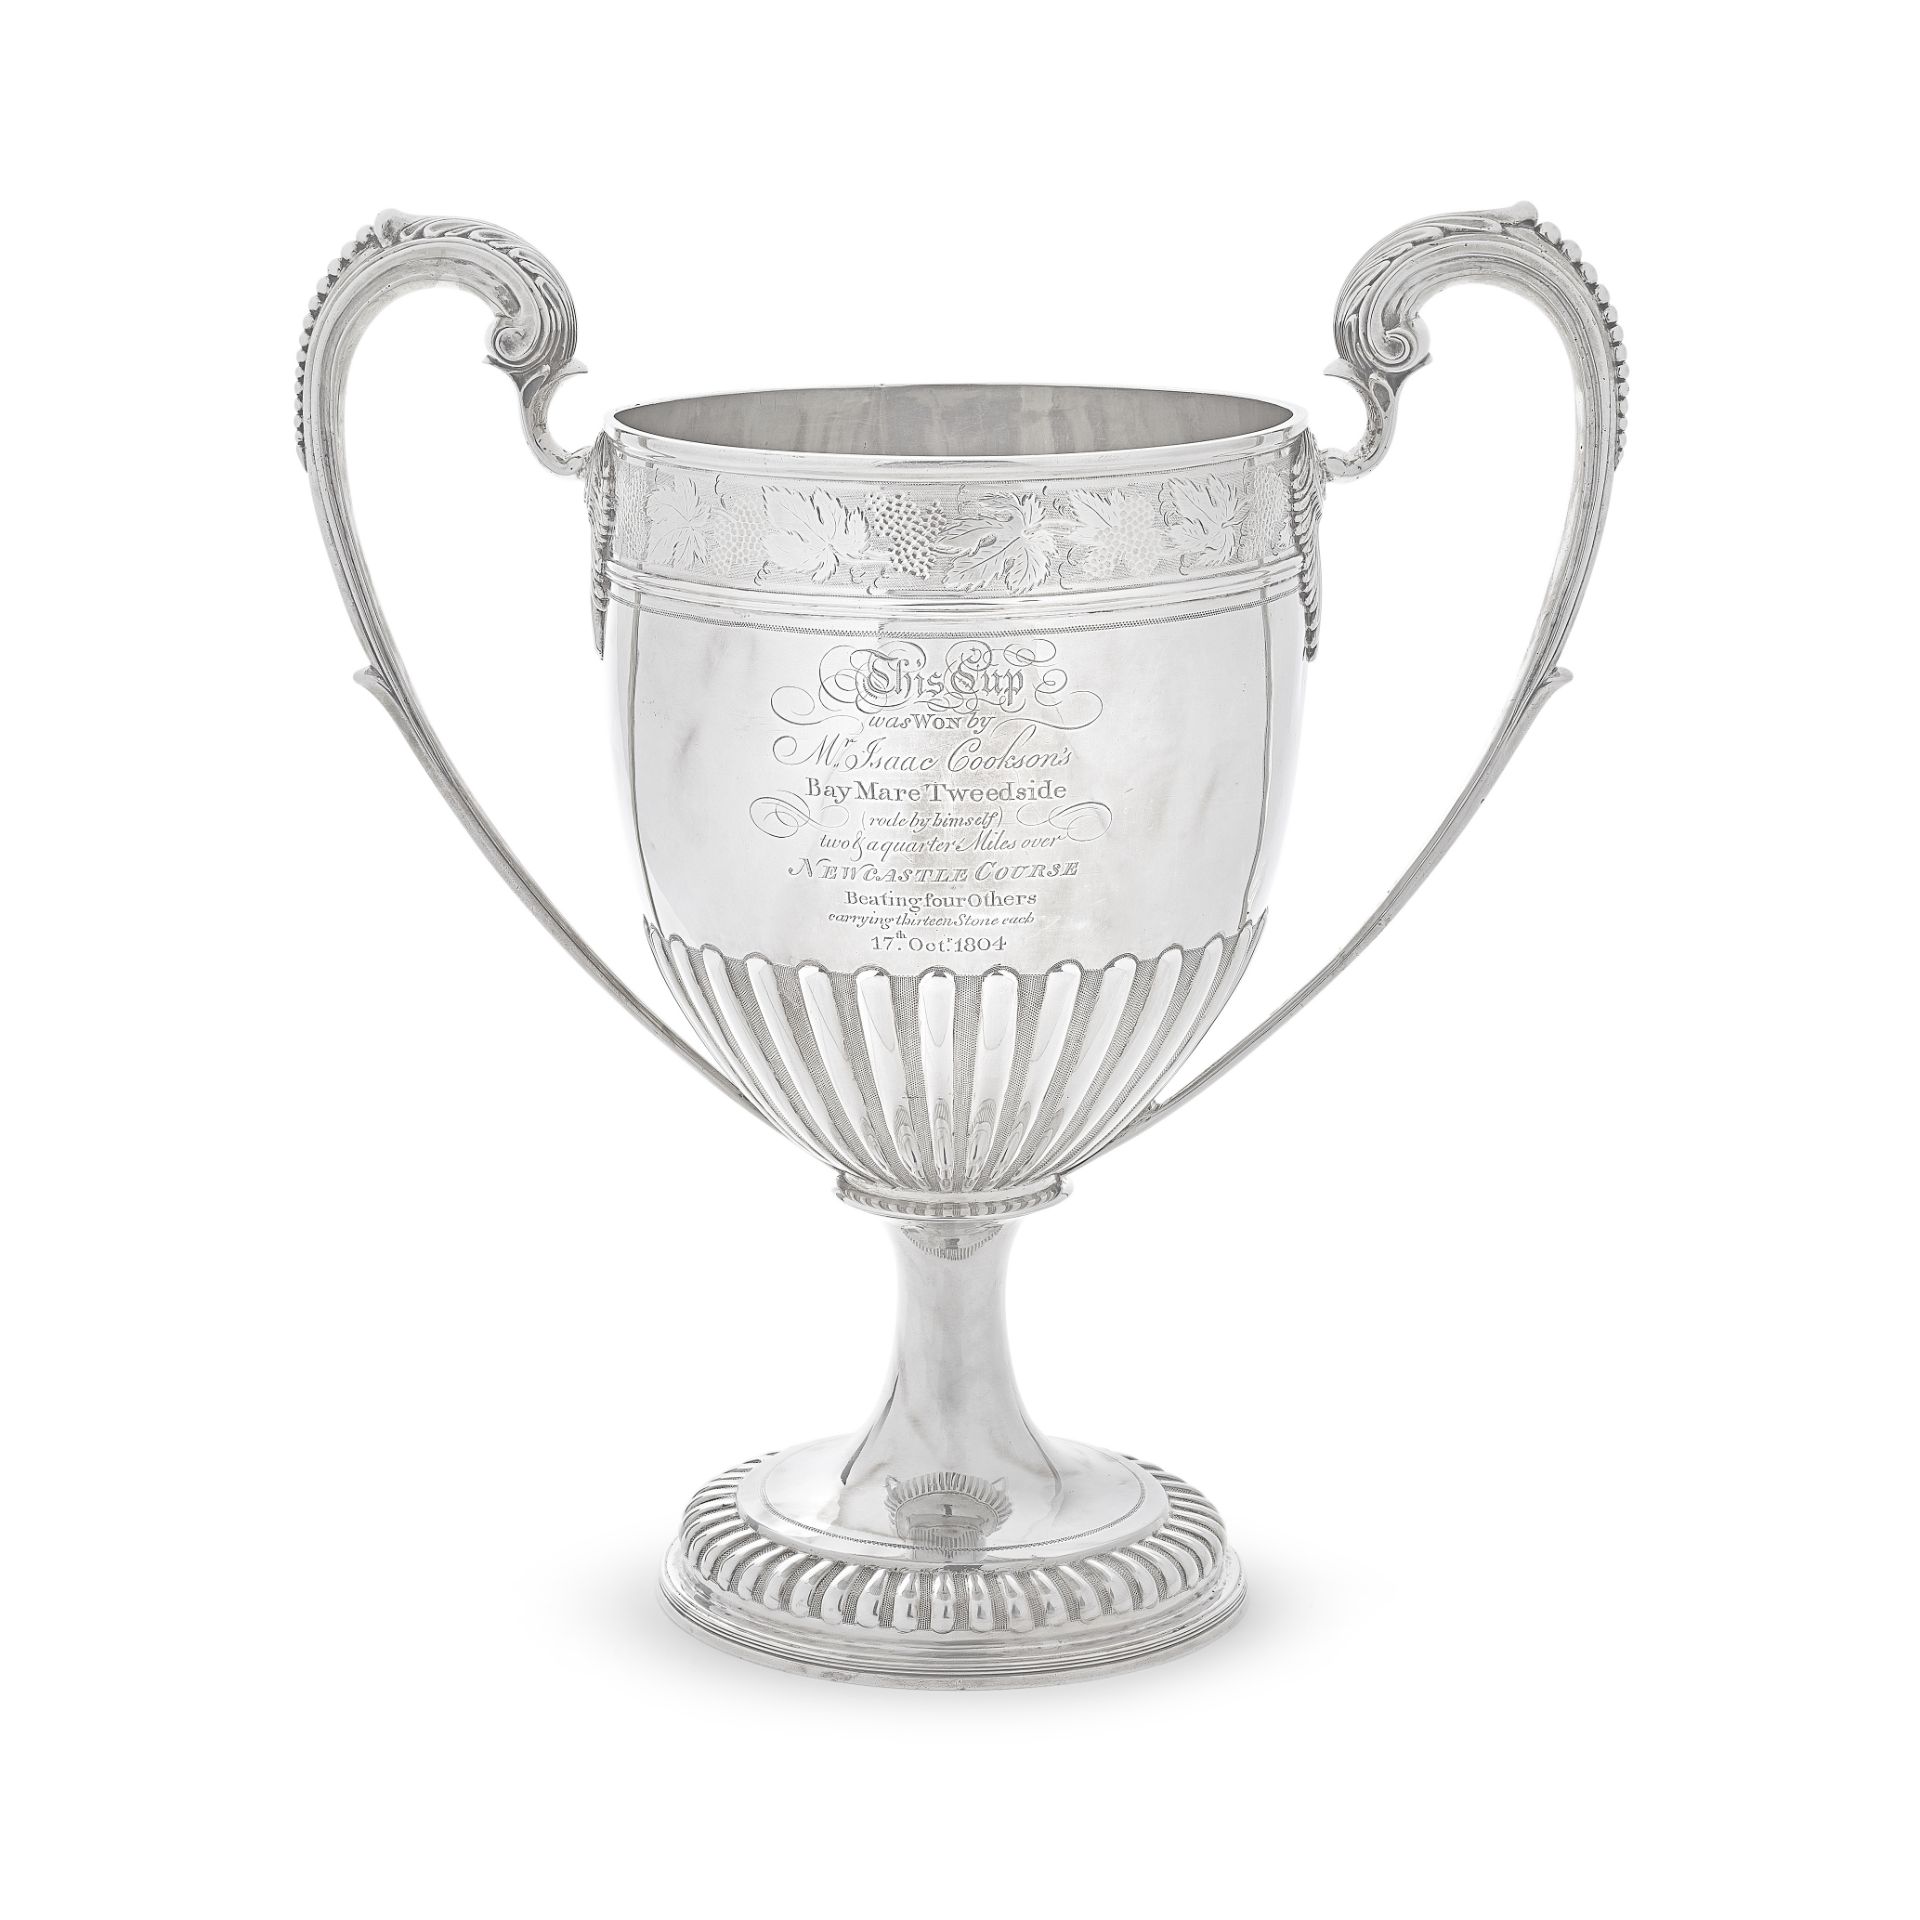 A GEORGE III PROVINCIAL TWO-HANDLED PRESENTATION CUP By Ann Robertson, Newcastle, 1804